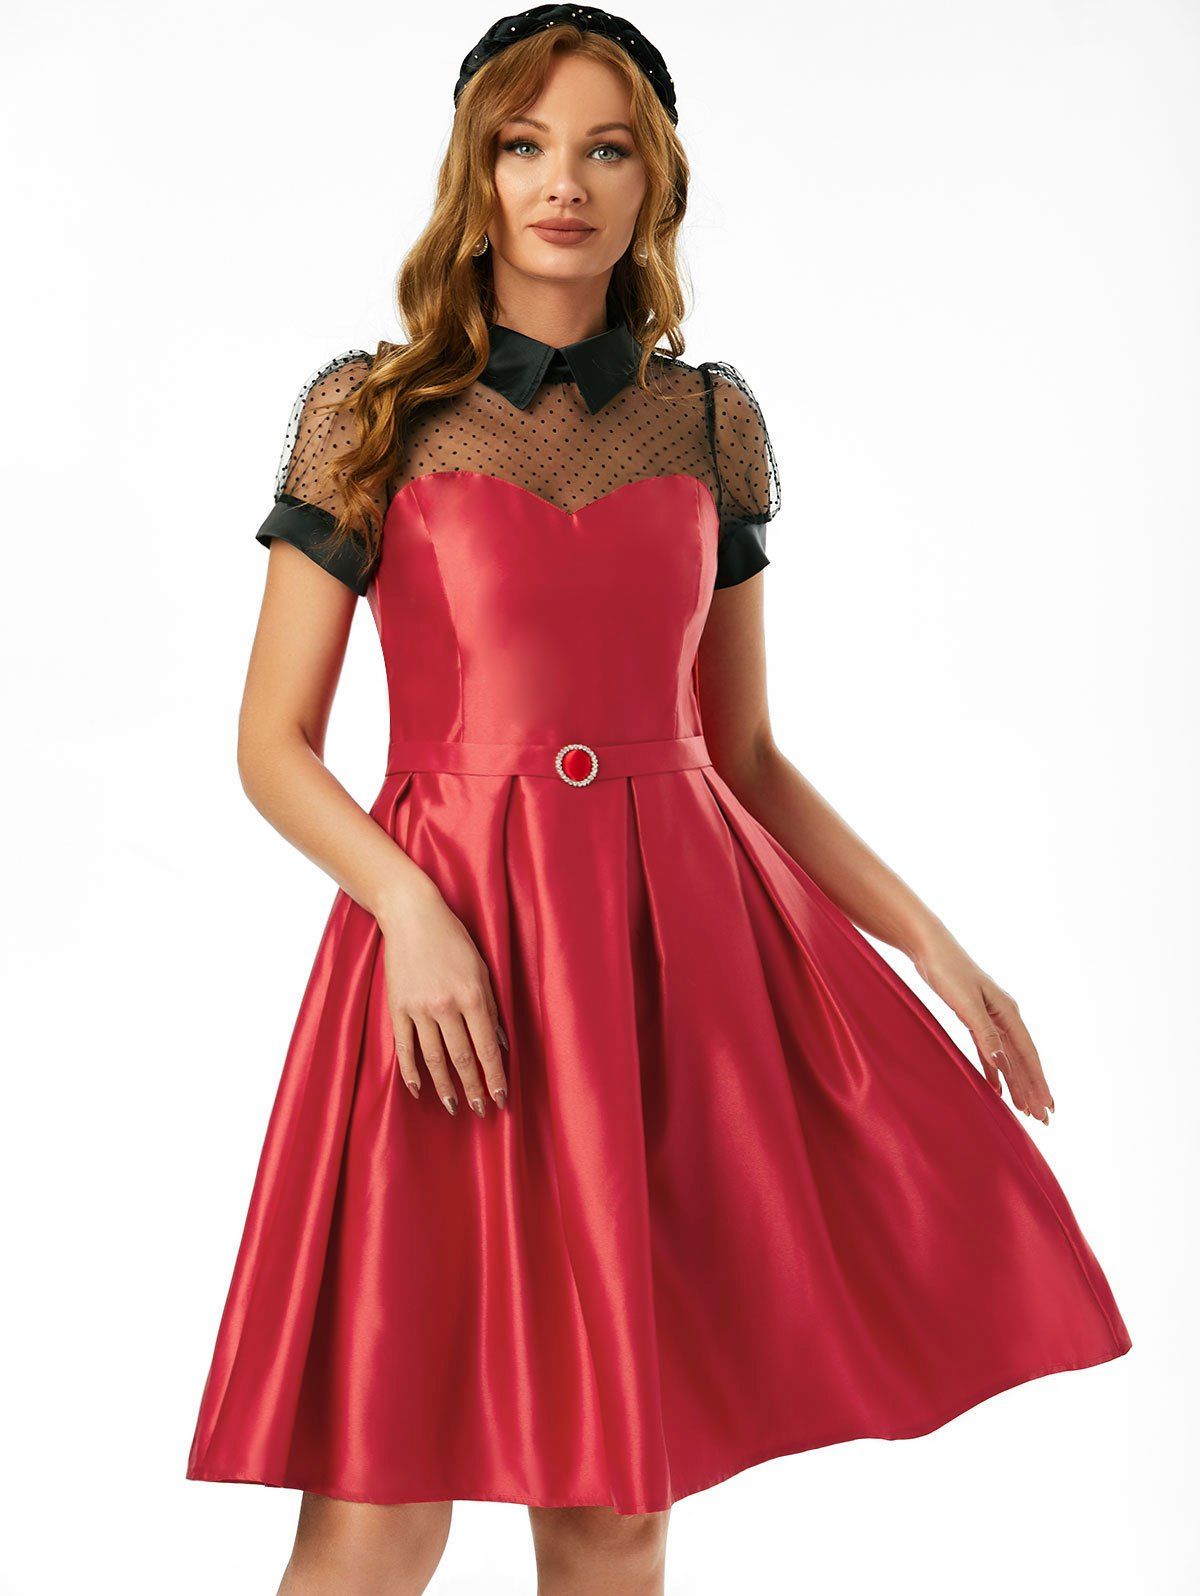 Mesh Insert Belted Prom Dress - RED L